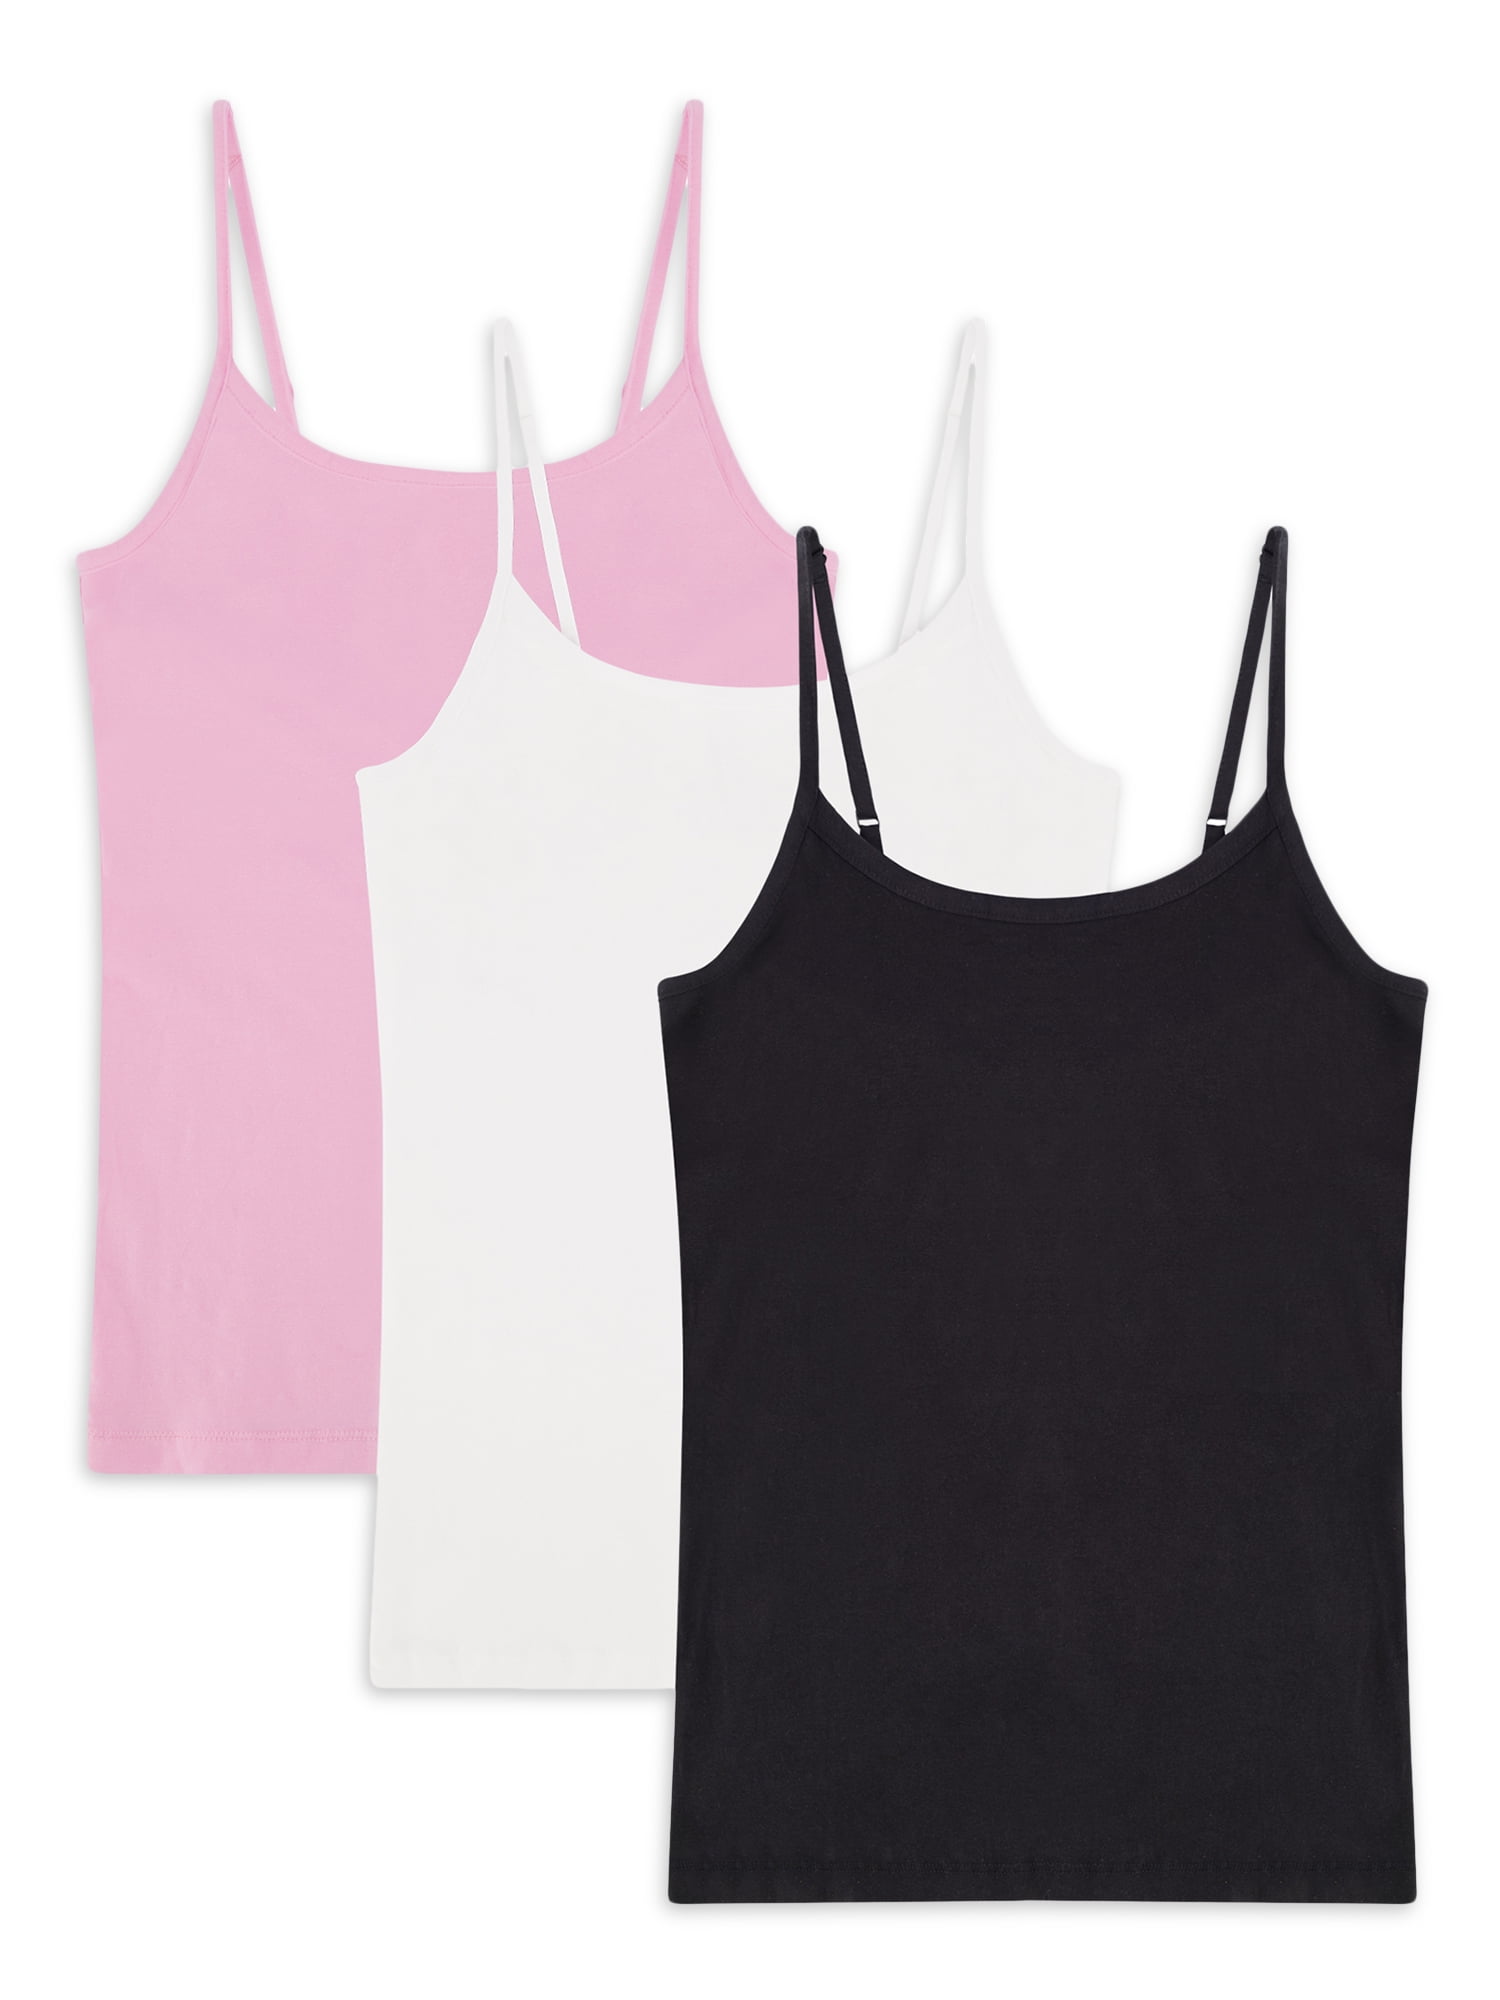 Best Fitting Panty Cotton Scoop Neck Camisole Adjustable Spaghetti Strap  Tank Top, 3 Pack